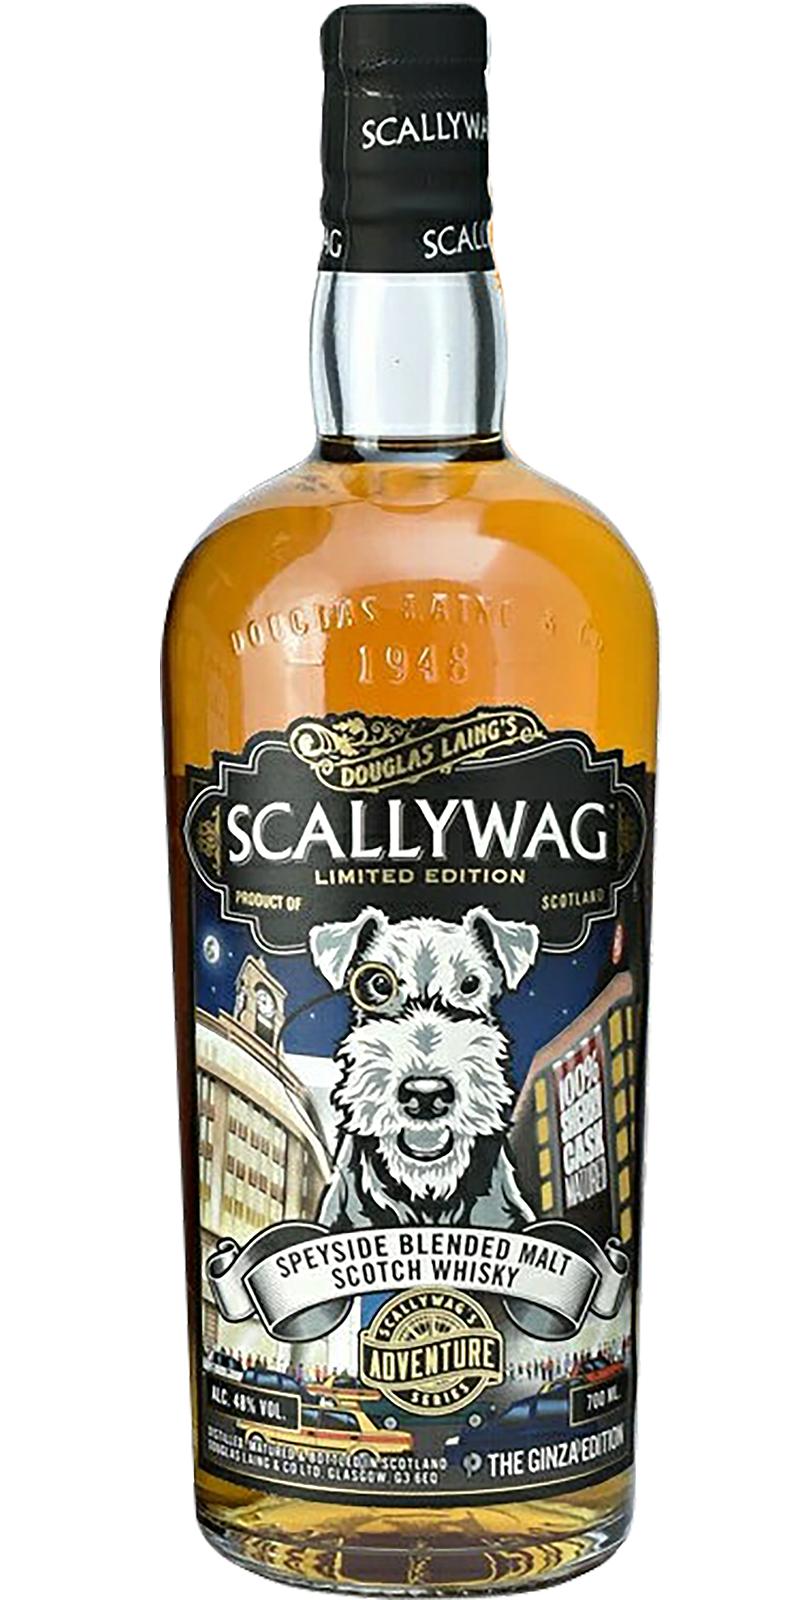 Scallywag The Ginza Edition DL Sherry 48% 700ml